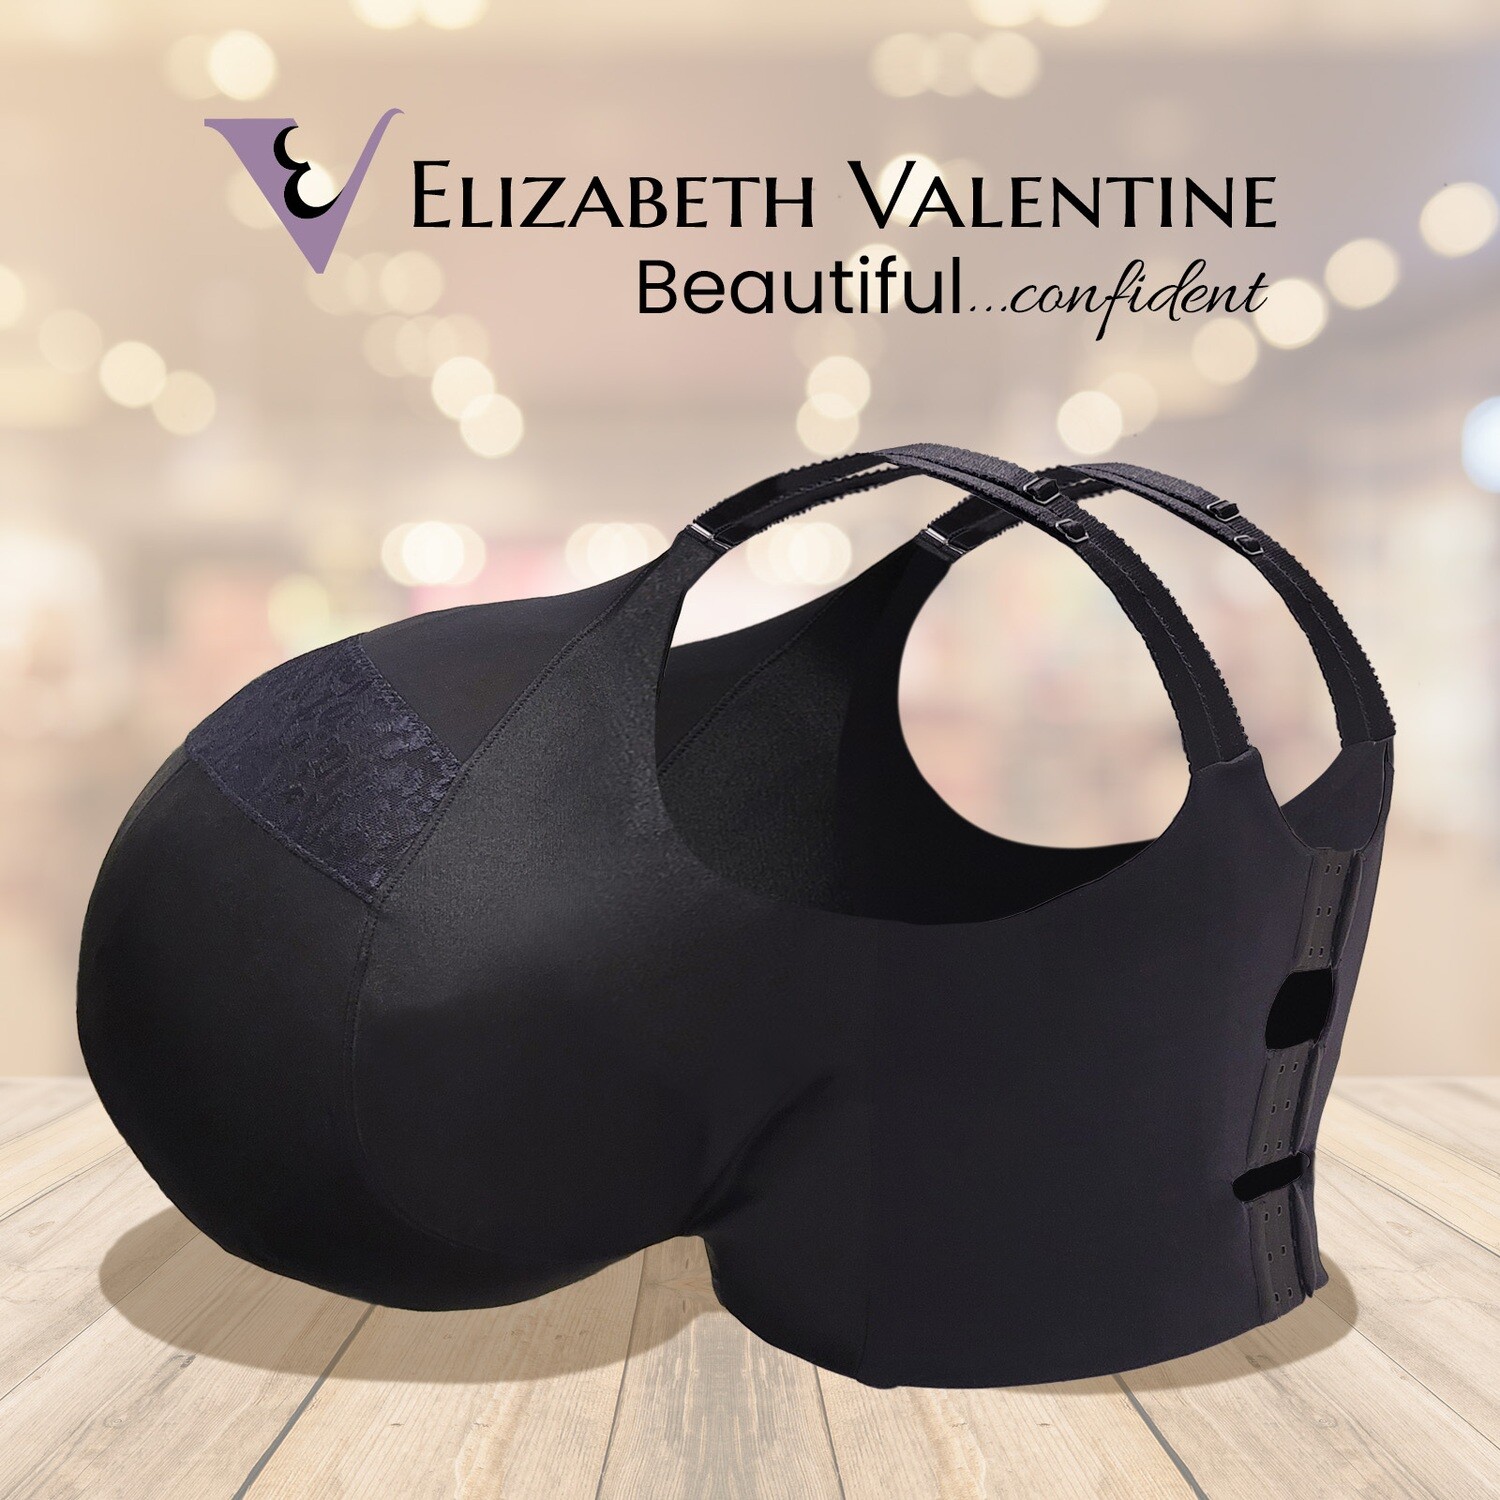 Shop Bras Made in Canada, Cup Sizes ZZZA to ZZZZ Bands 24+ DDDD+ for Big  Bras - Shop - Elizabeth Valentine - Canadian Bras - Bands 24 - 64 - Cups AA  - Z